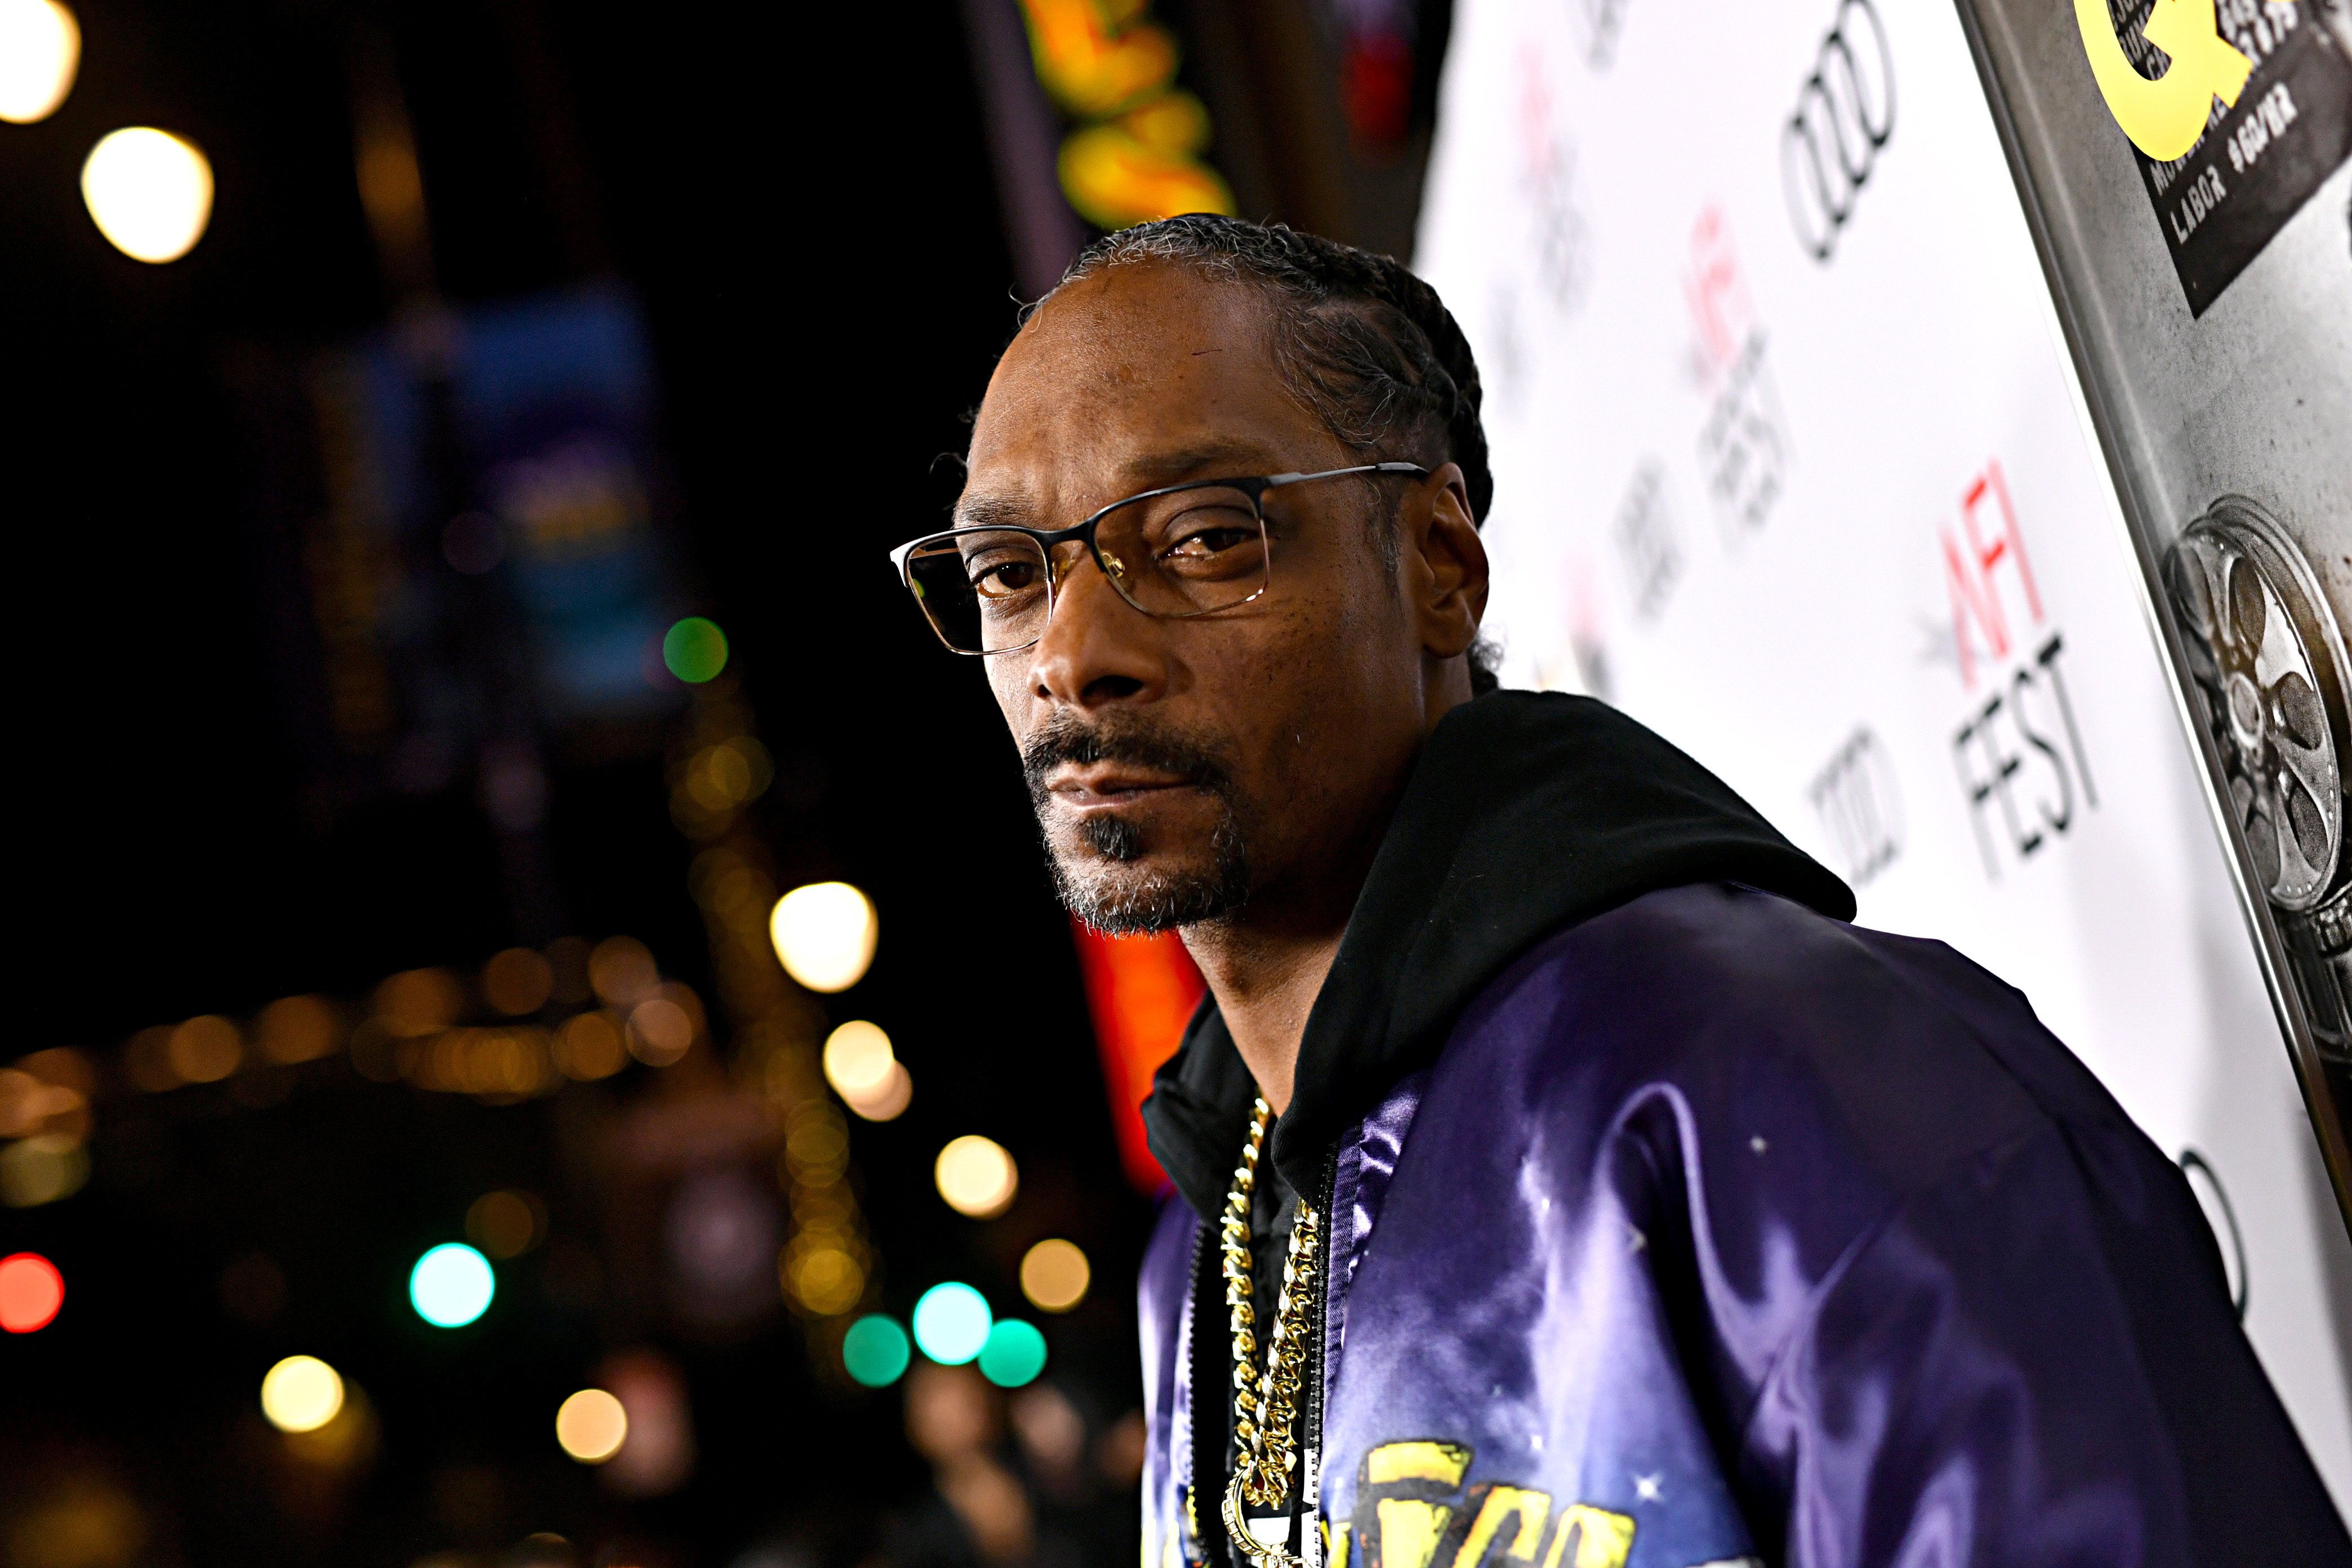 Snoop Dogg pictured at the "Queen & Slim" Premiere at AFI FEST 2019 on November 14, 2019 in Hollywood, California. | Source: Getty Images